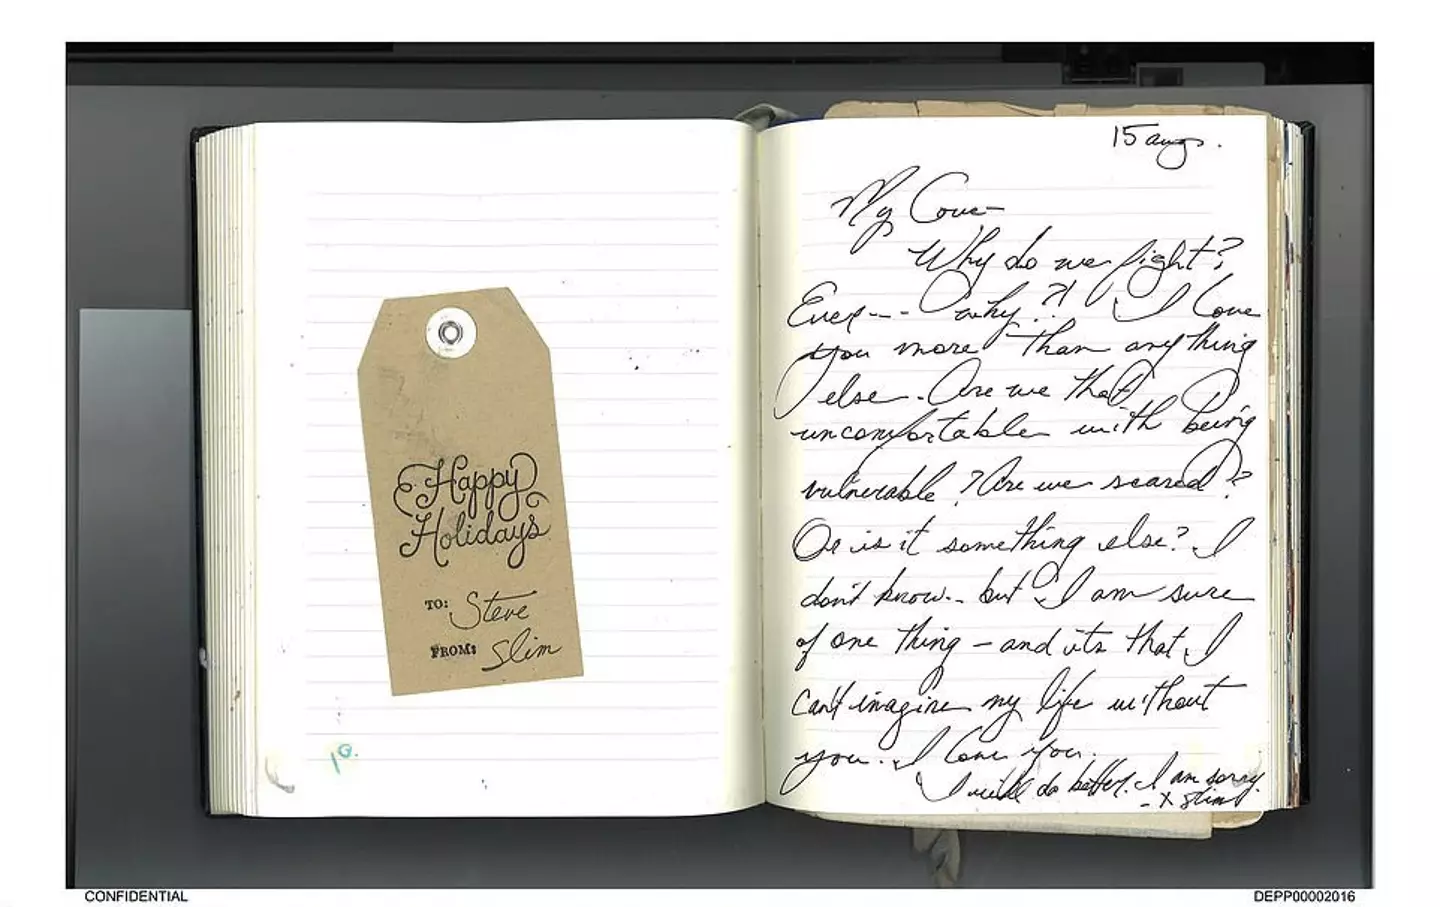 Johnny Depp and Amber Heard shared the 'love journal', which would see them write love notes to one another.